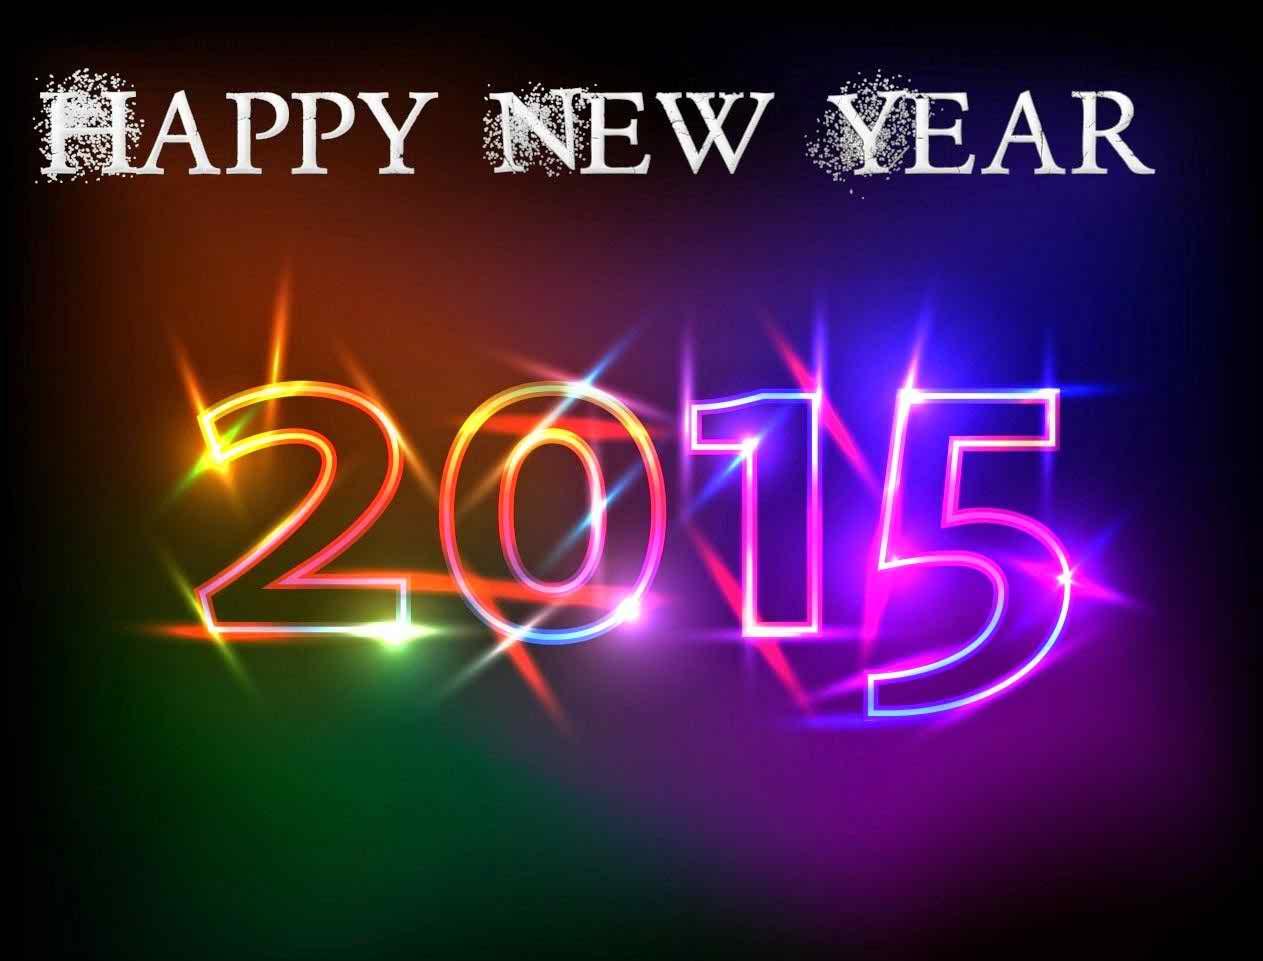 Related Wallpaper For New Year Puter Image Colorful